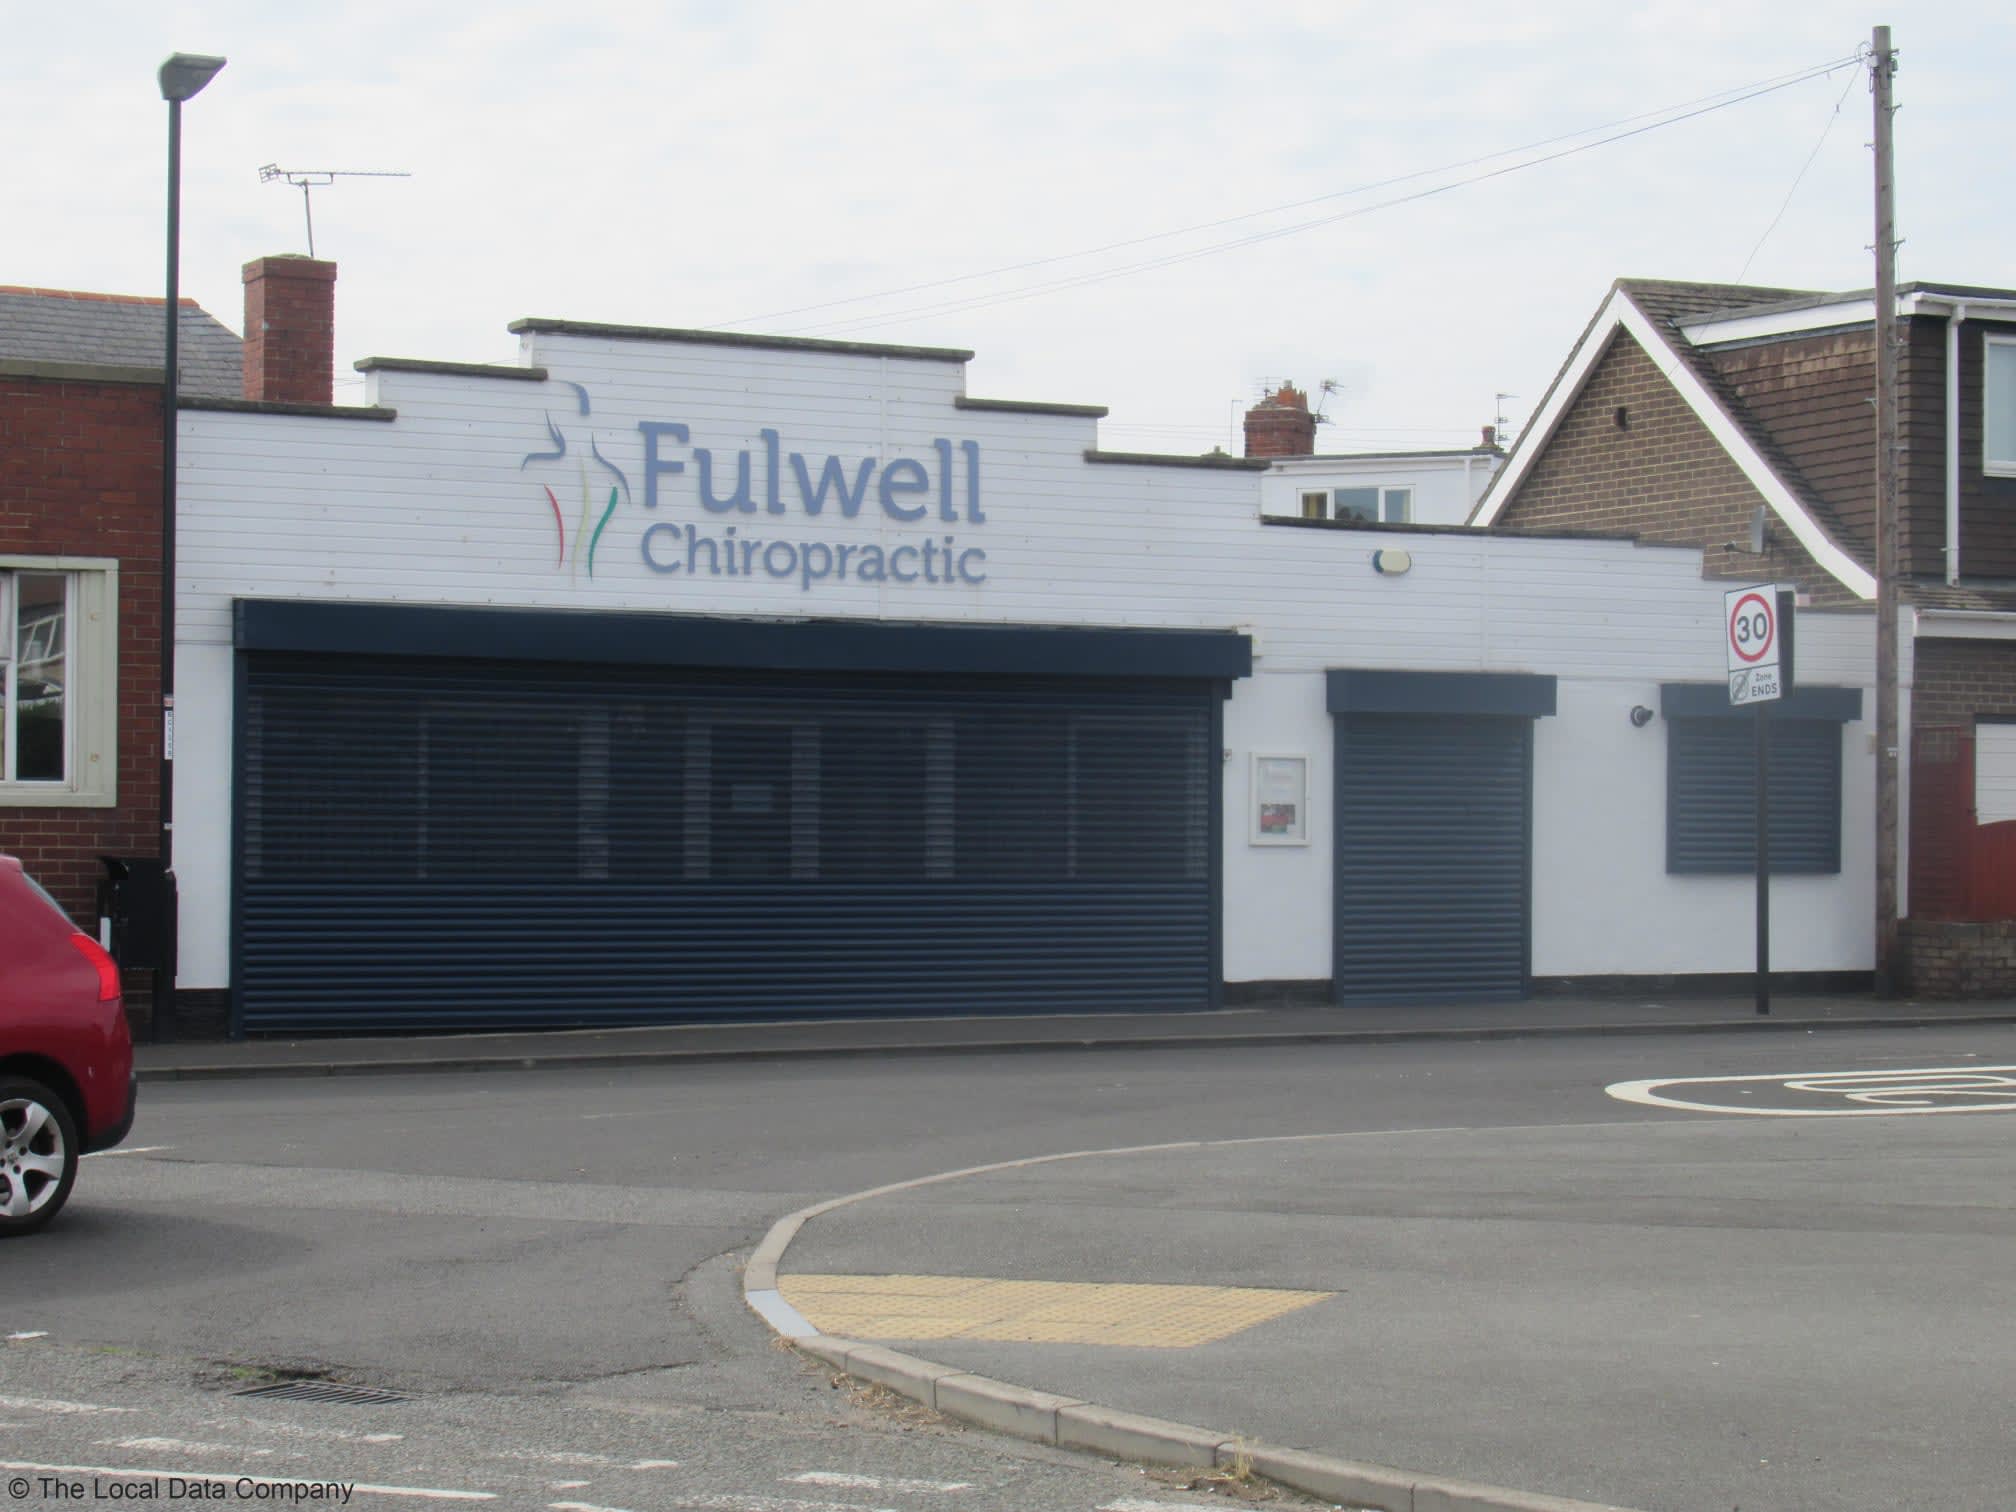 Fulwell Ceiling Contracts Ltd Sunderland 01915 481419